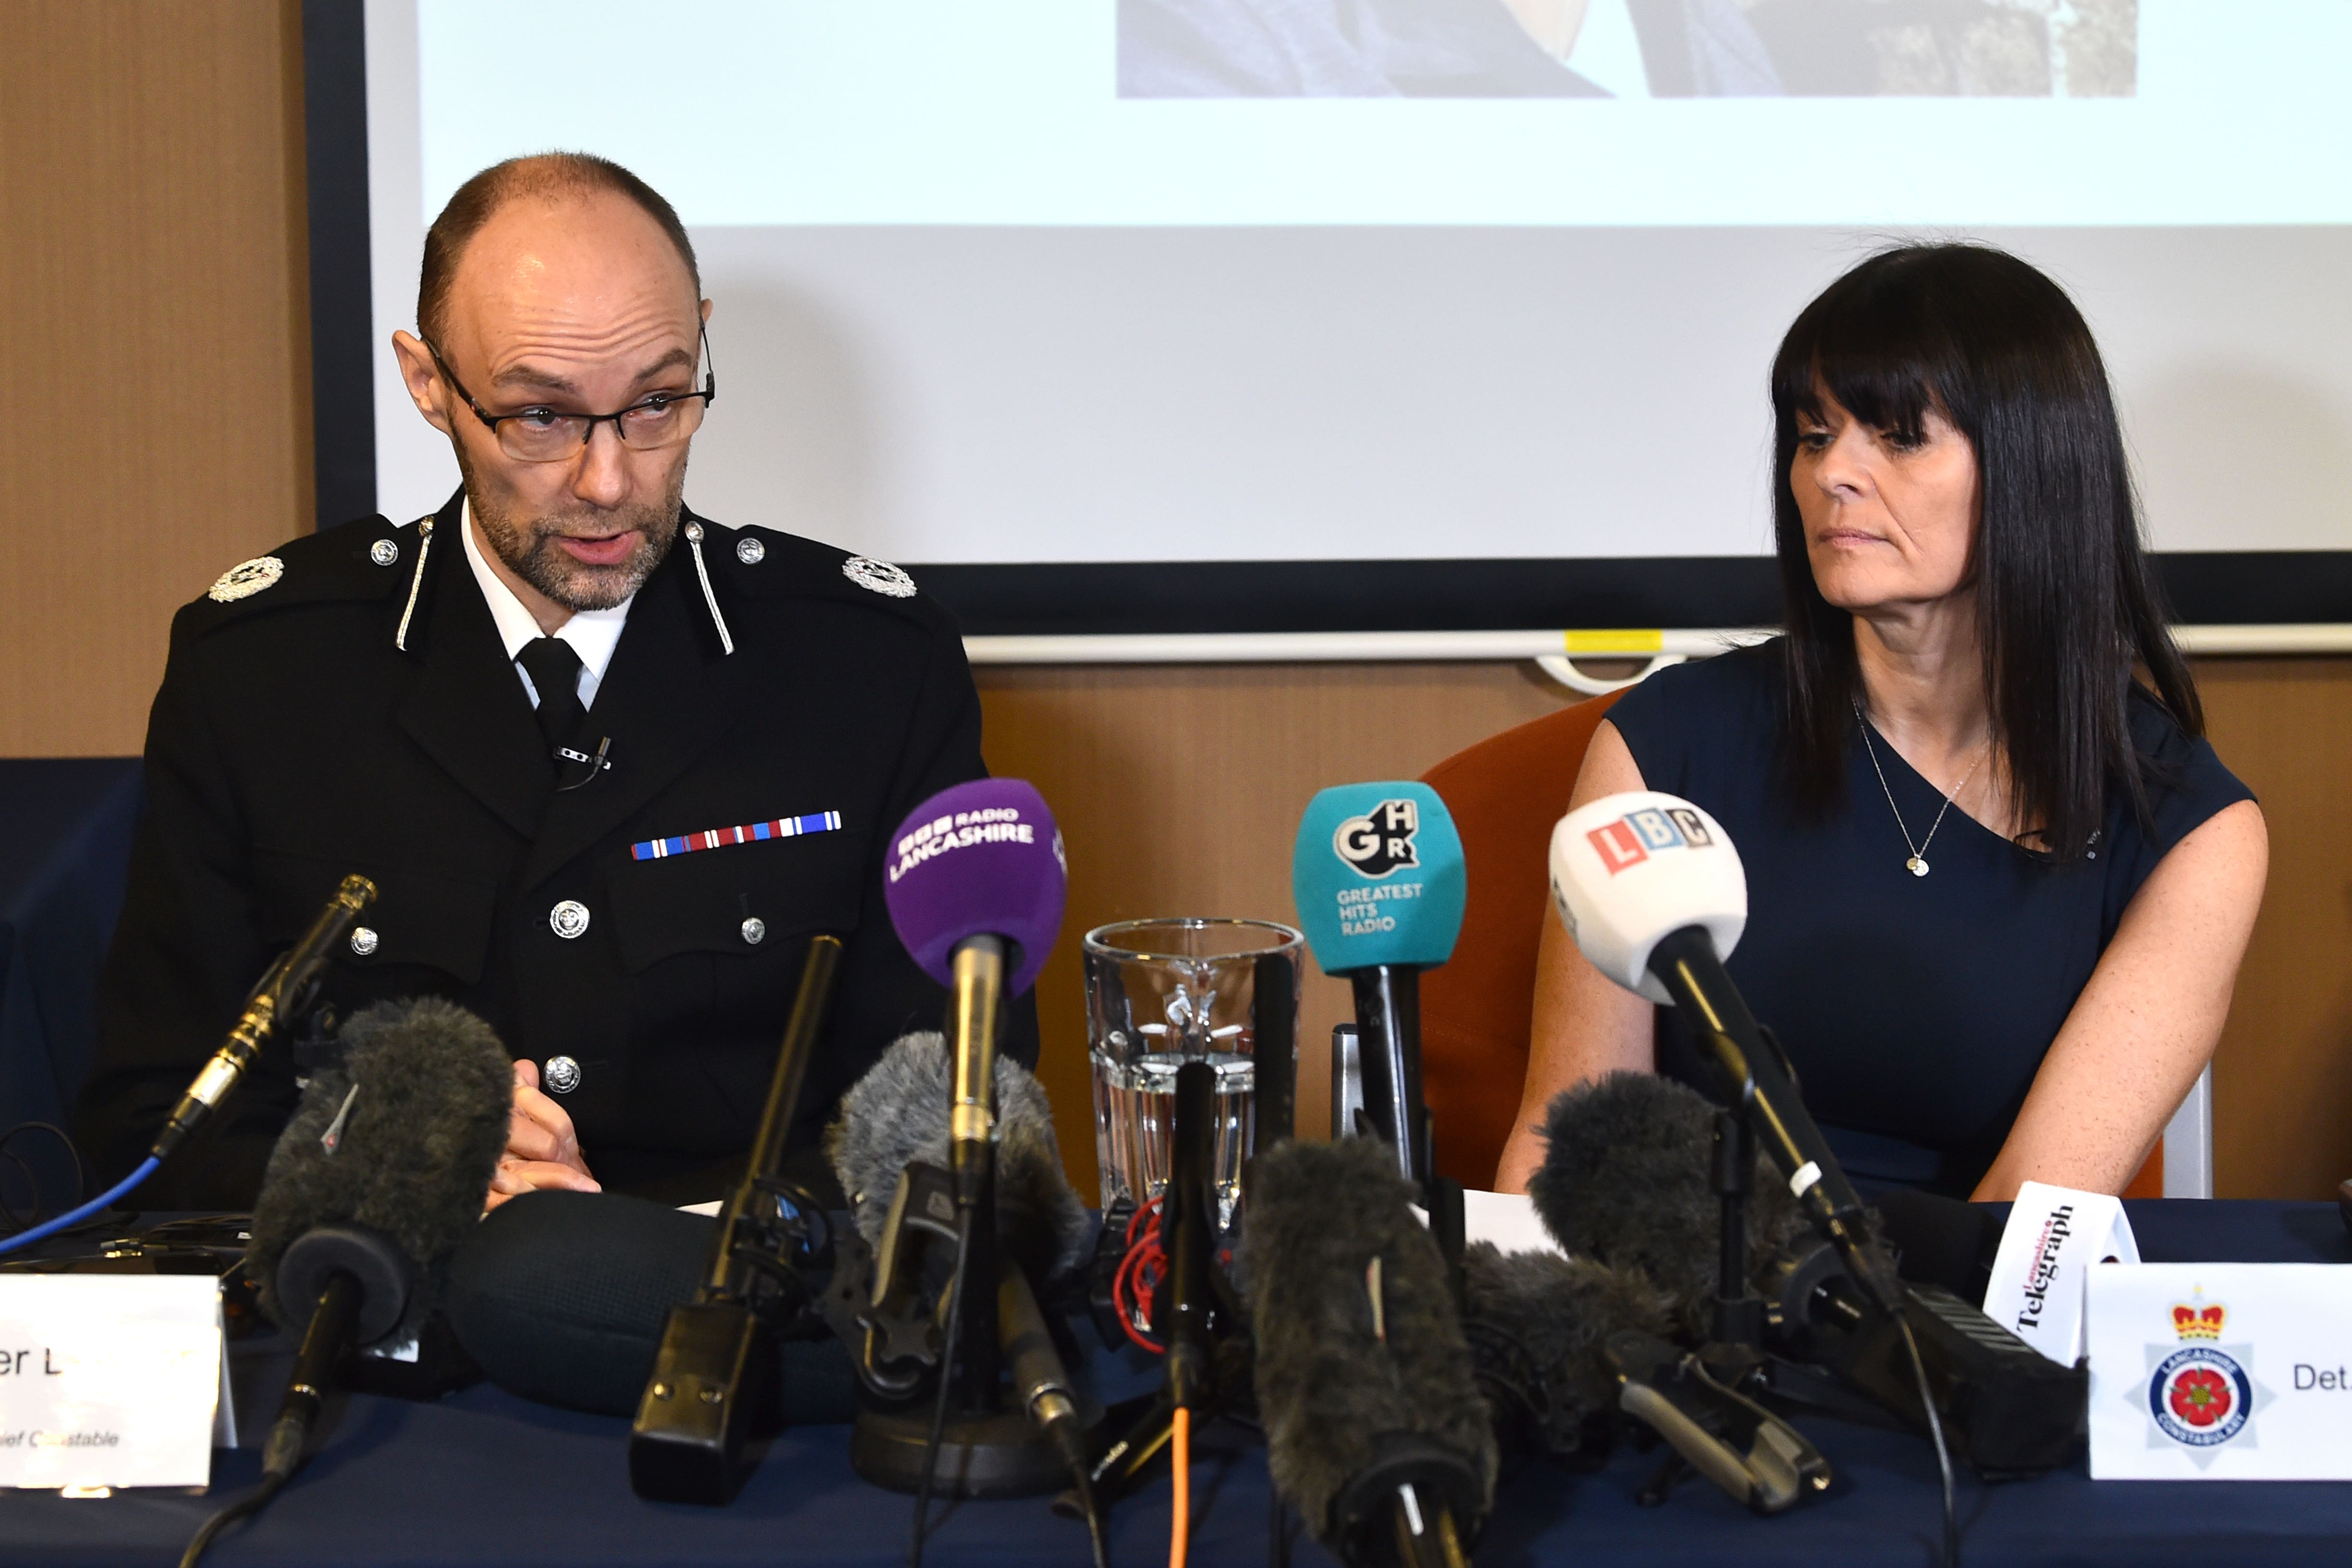 Assistant Chief Constable Peter Lawson and Detective Superintendent Rebecca Smith held the briefing